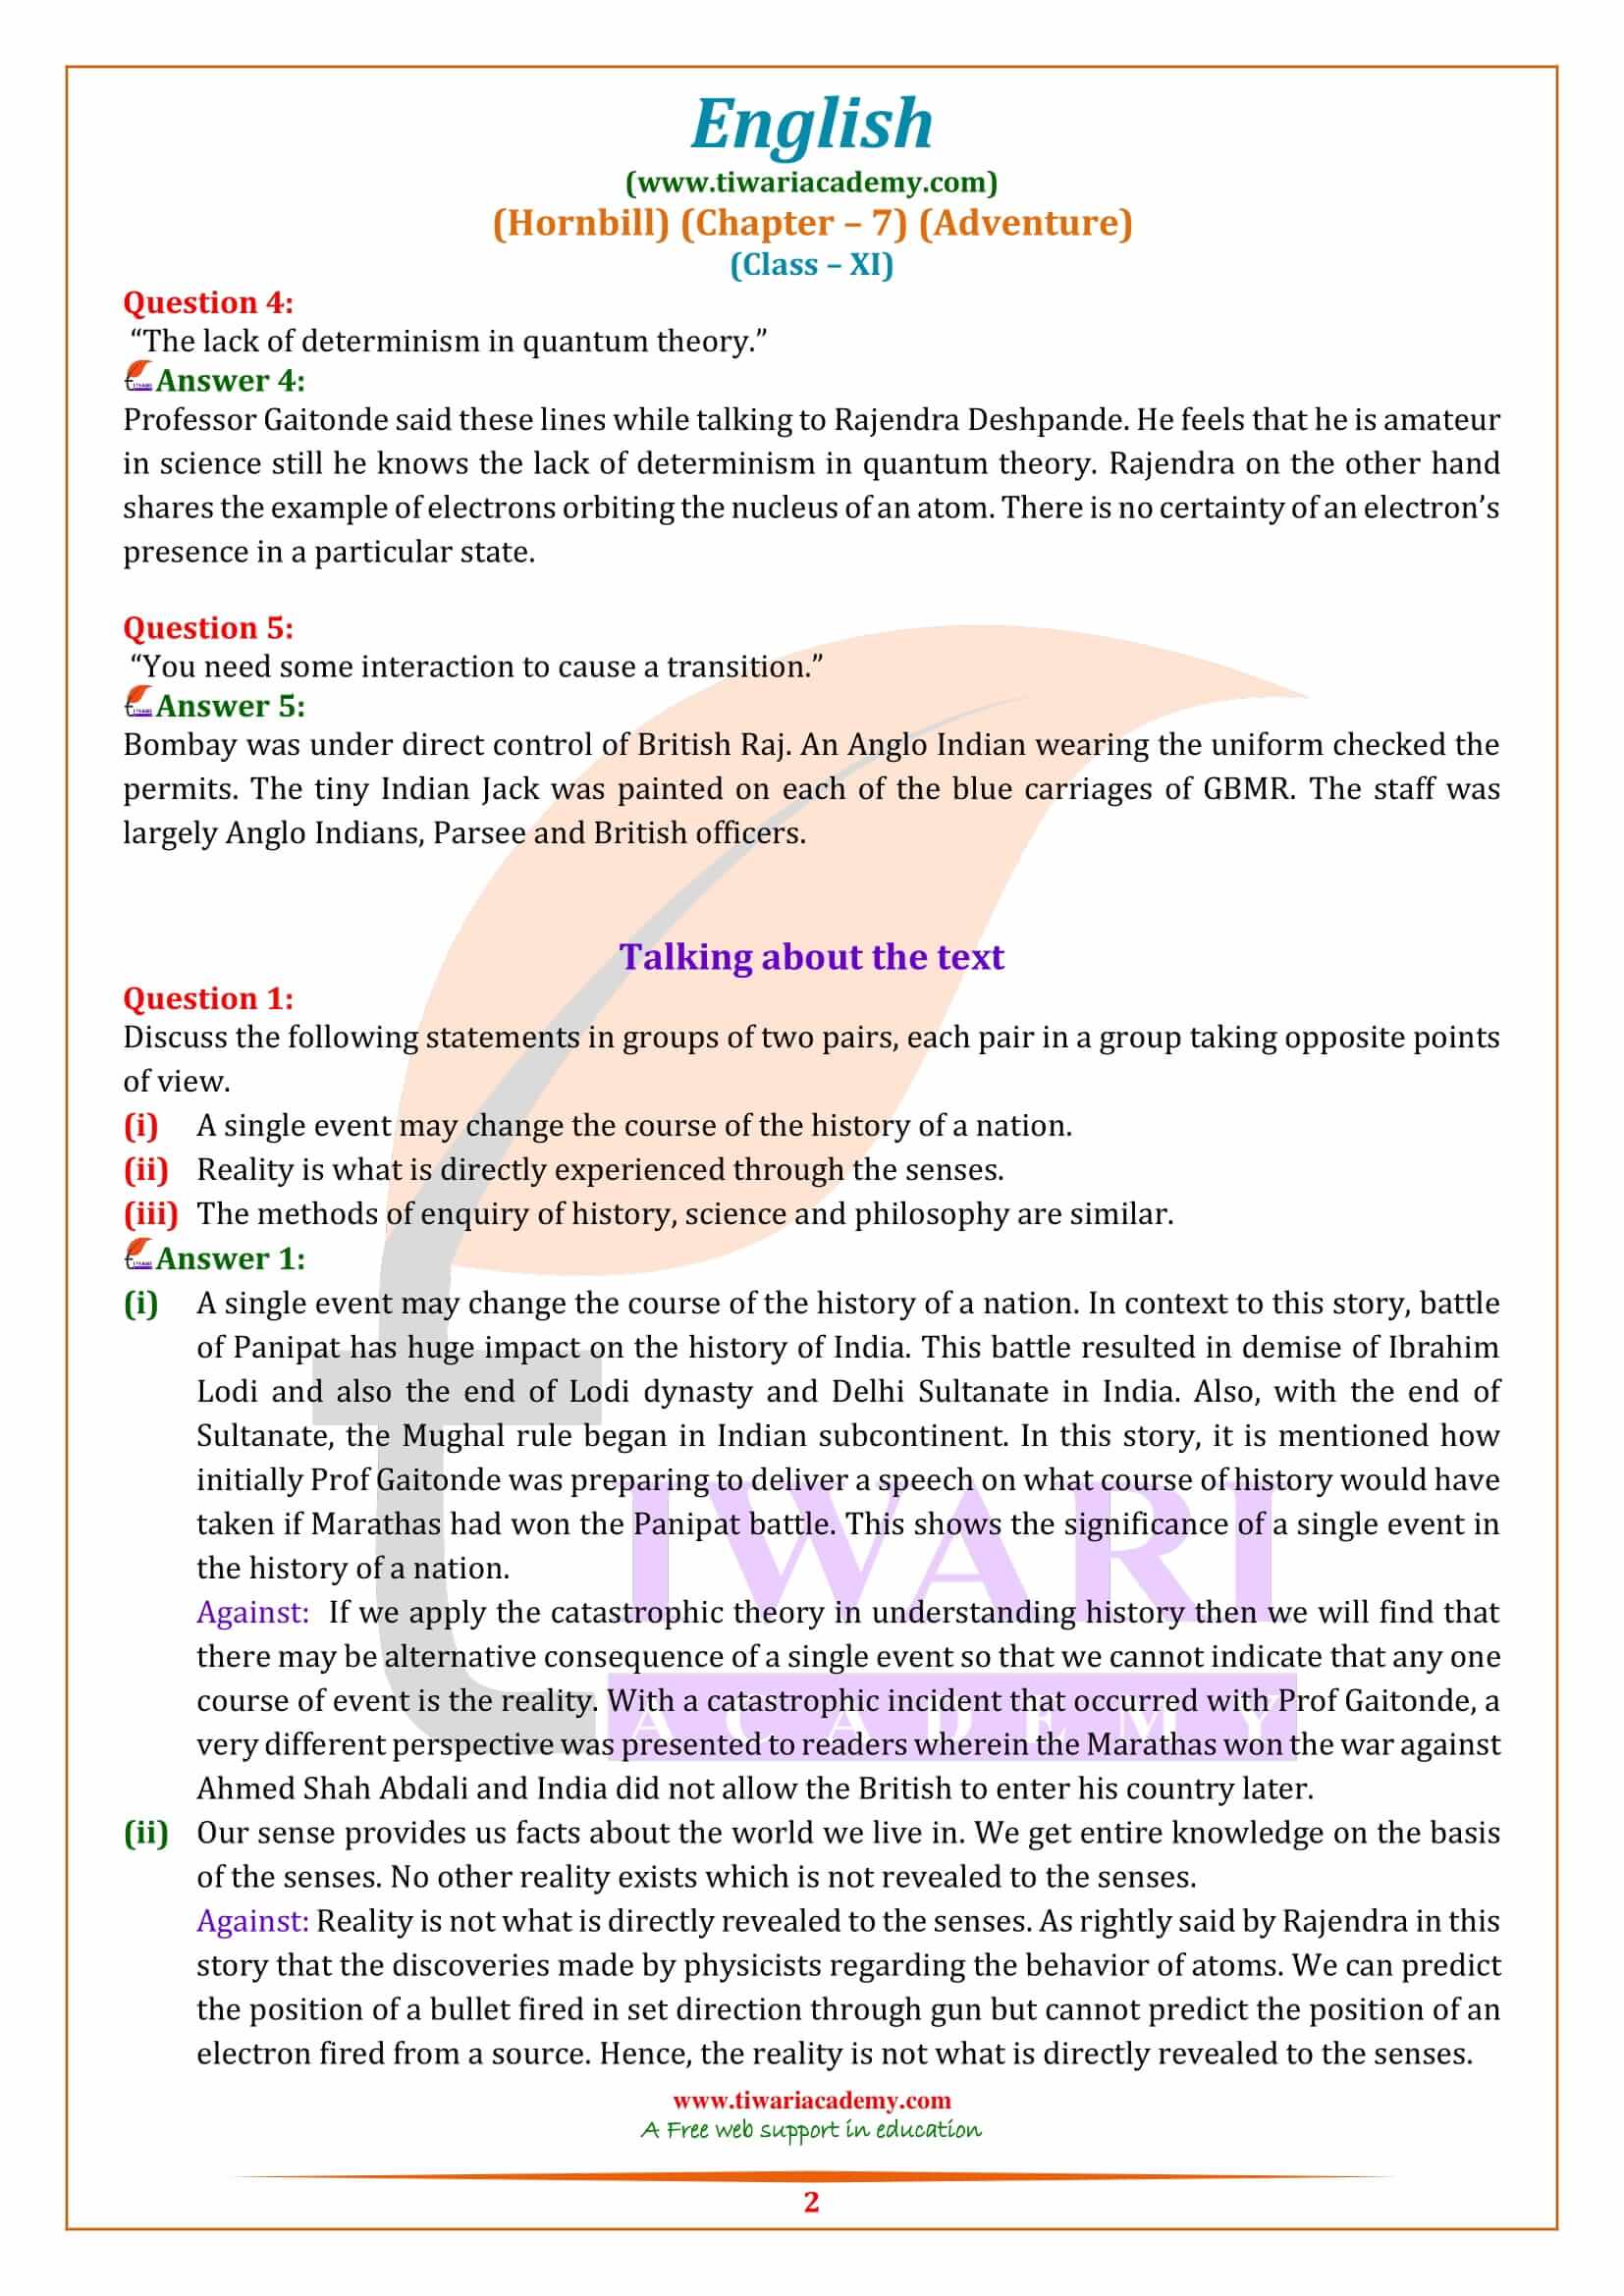 NCERT Solutions for Class 11 English Hornbill Chapter 7 Question Answers